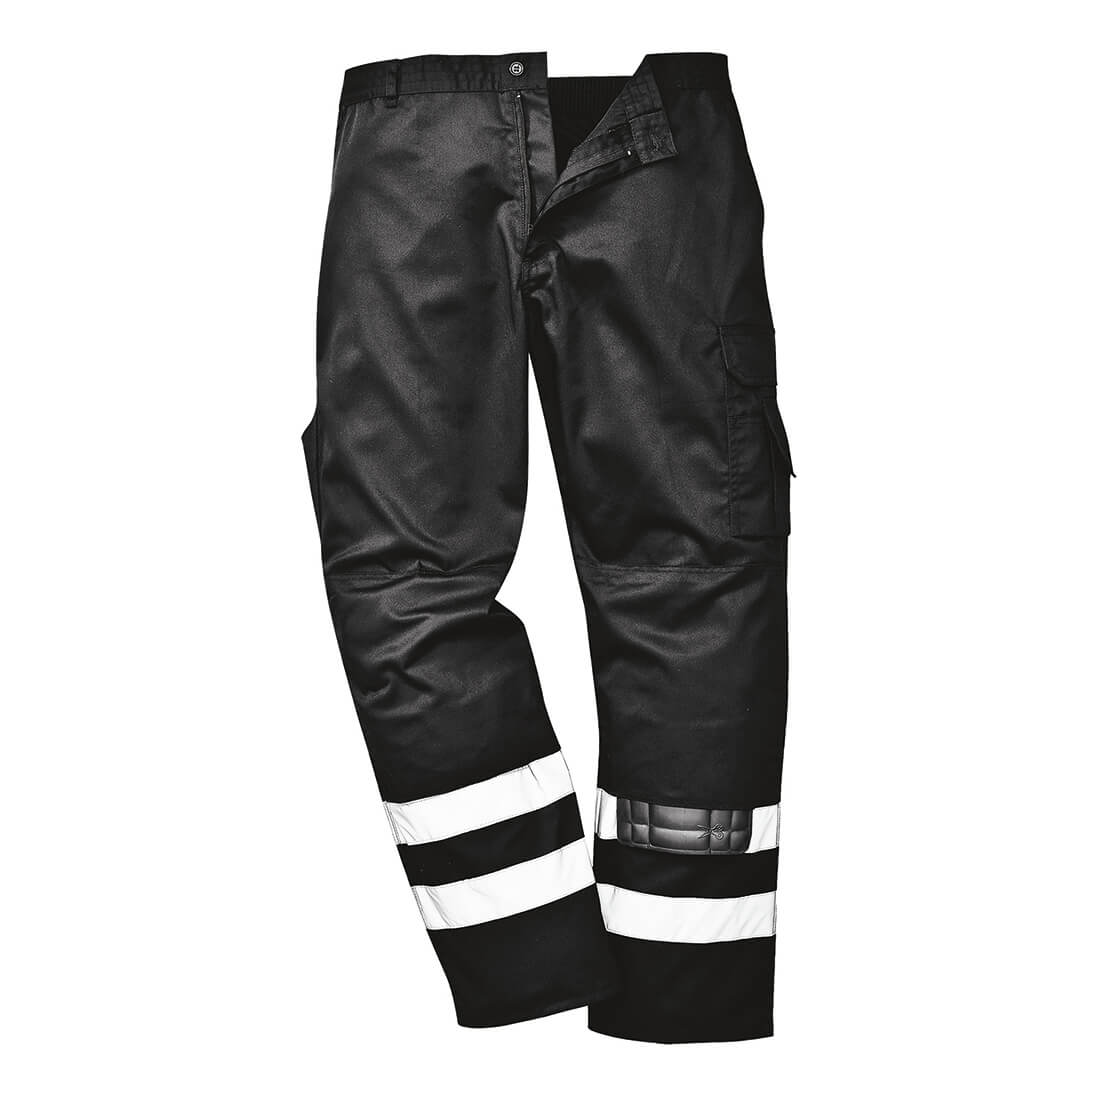 Photo of Portwest Iona S917 Safety Trousers Black Large 31